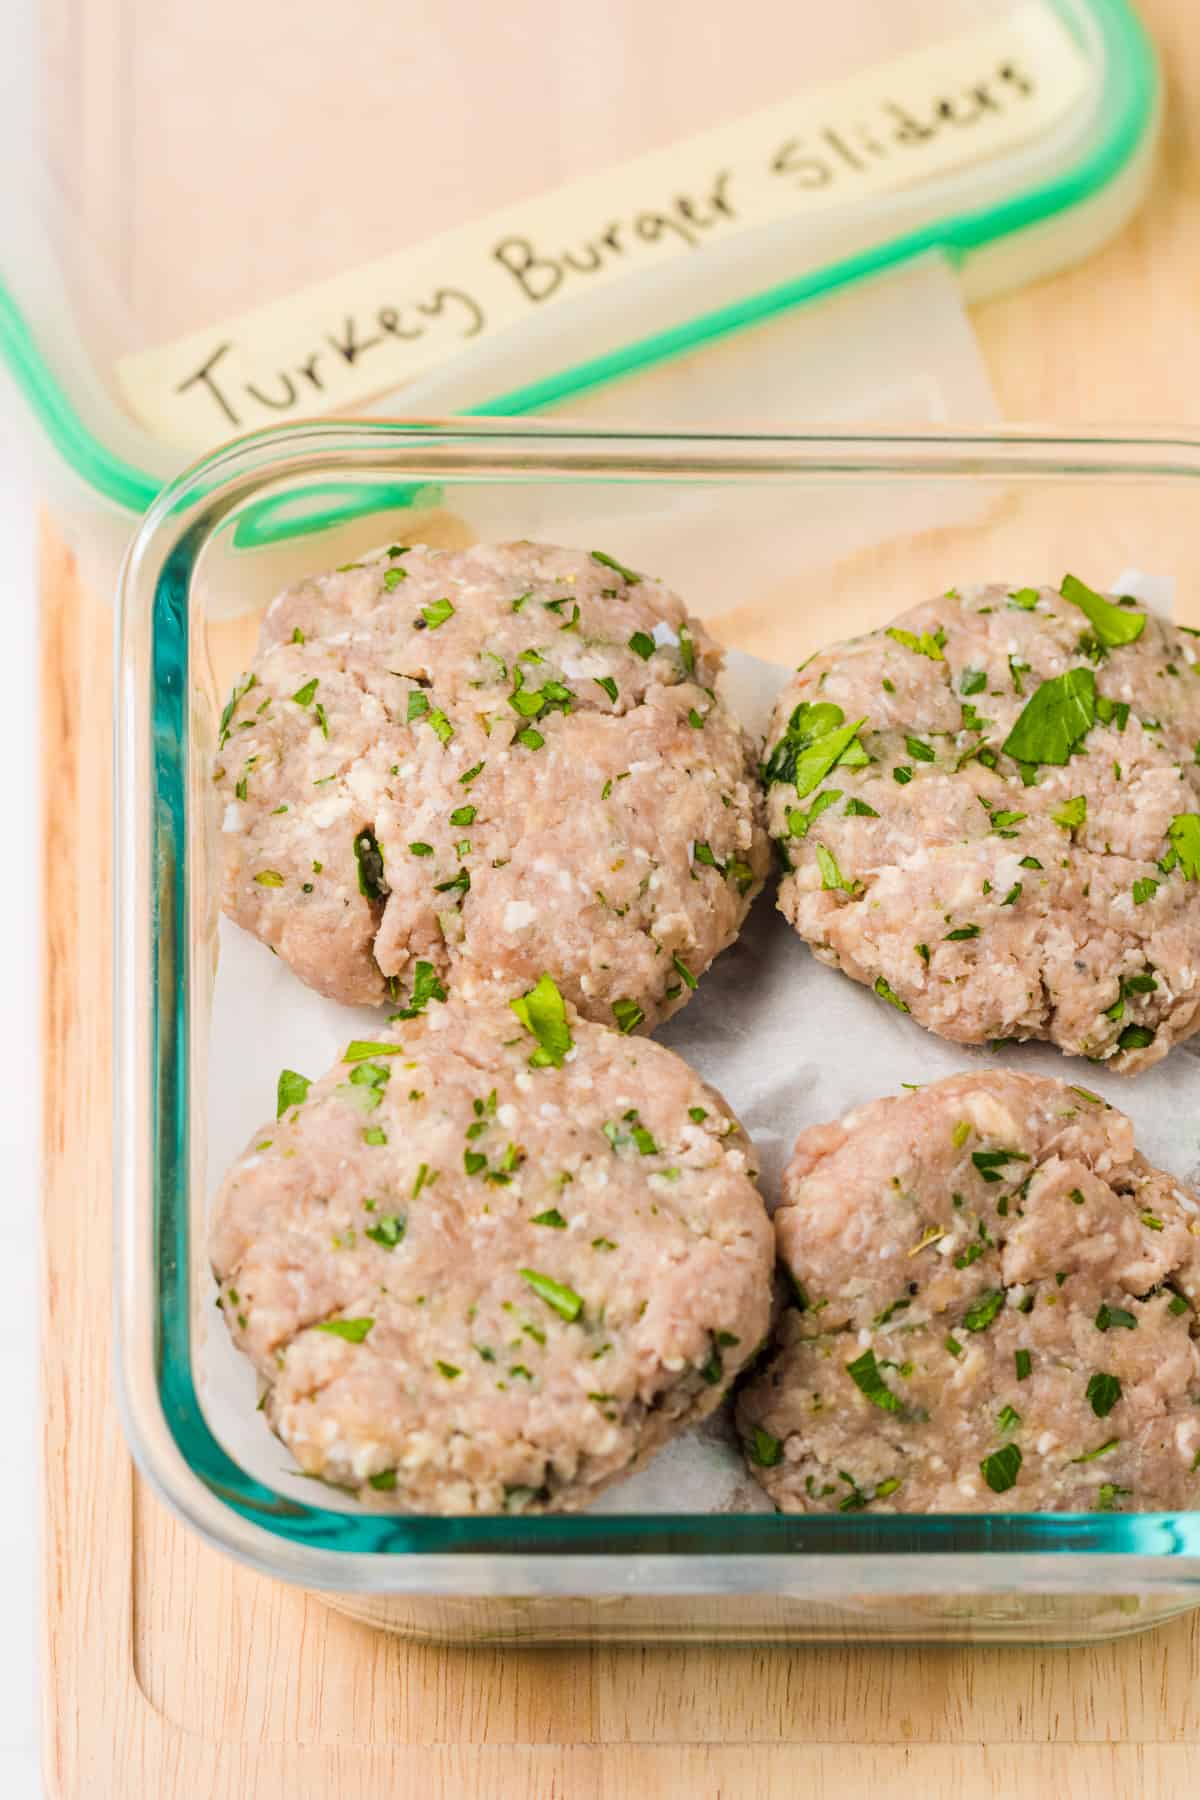 Turkey burger sliders prepped and placed on parchment paper in a freezer container.